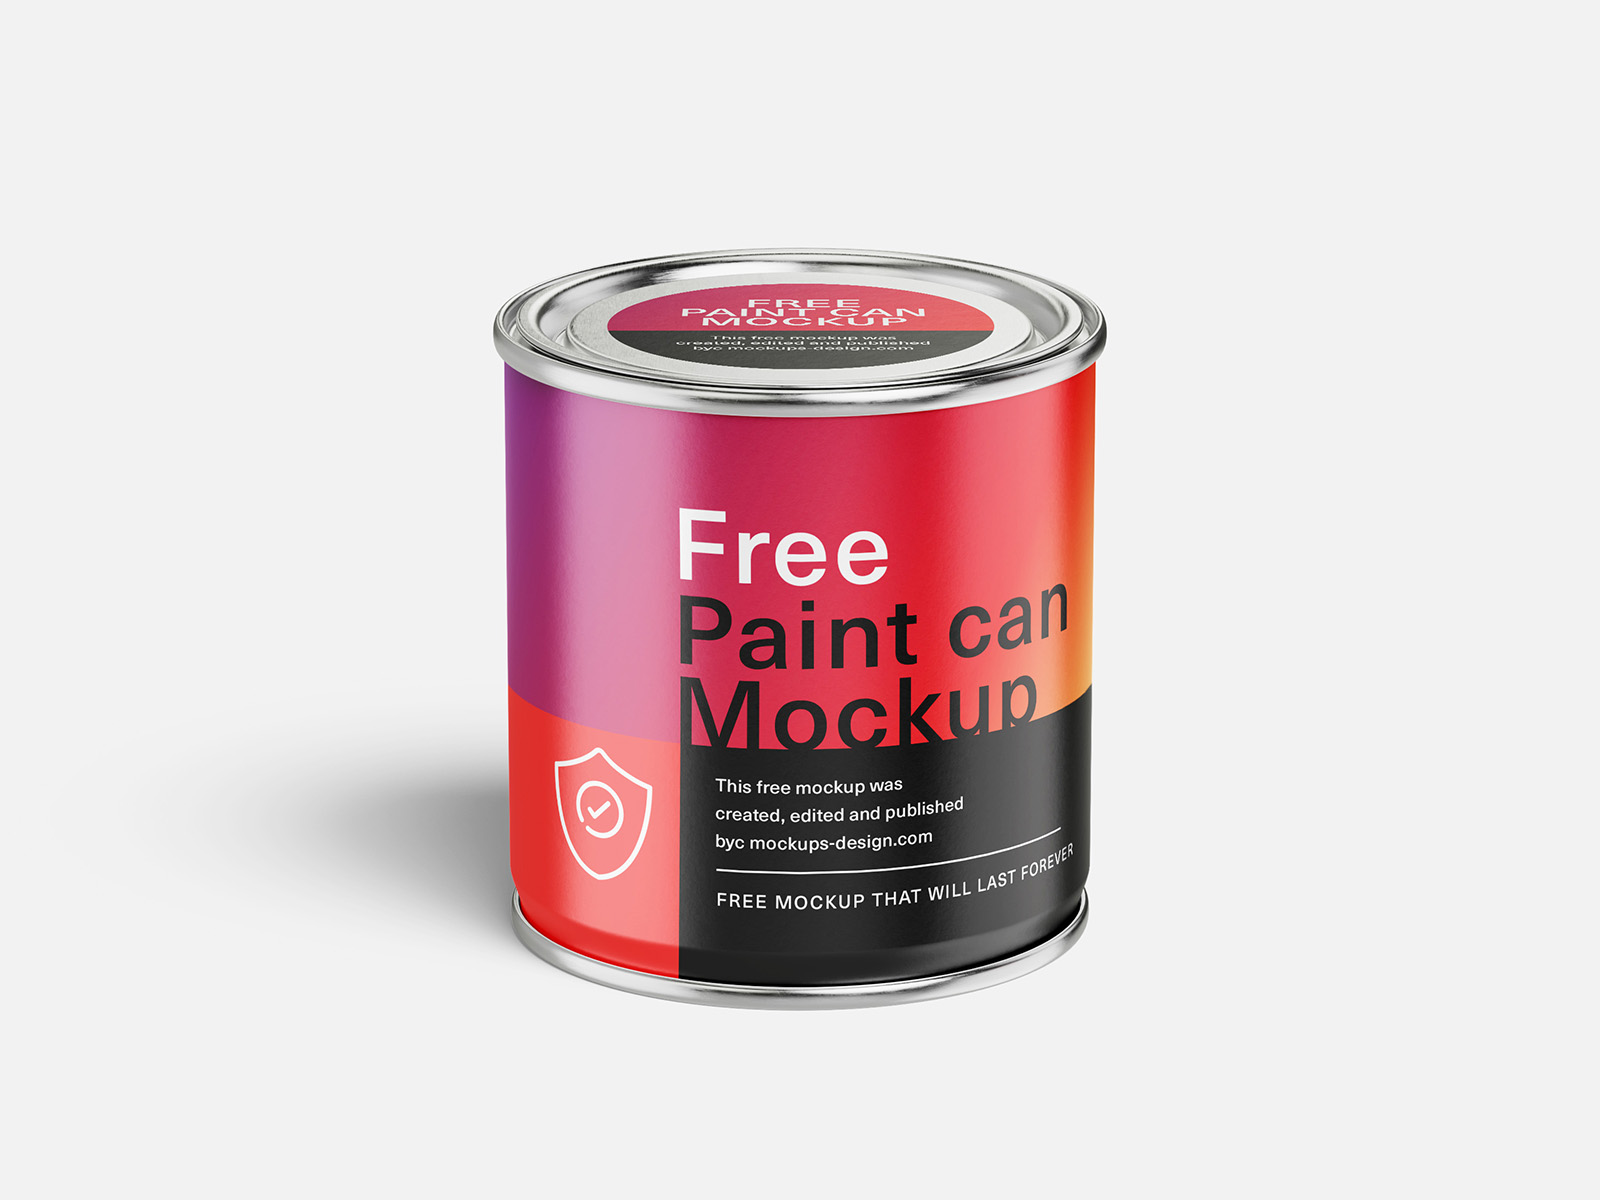 Free paint can mockup